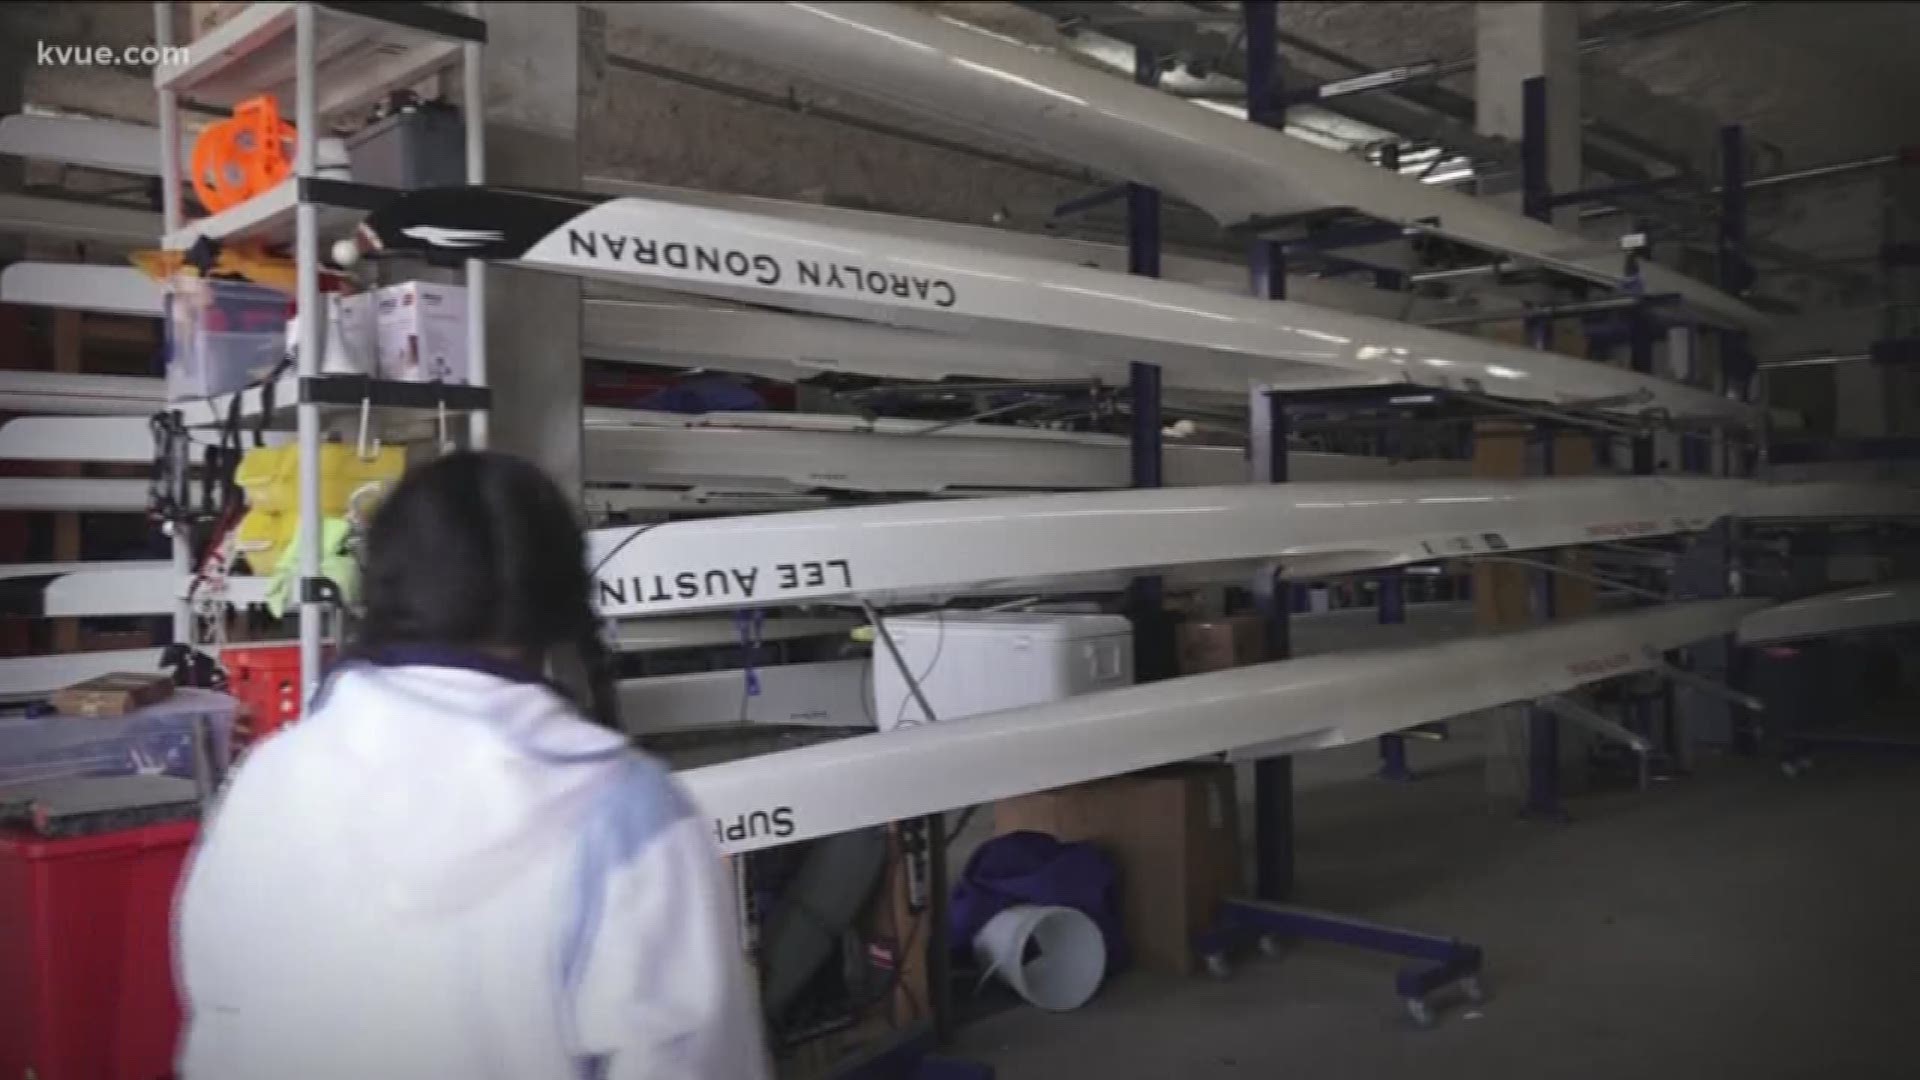 The Austin Rowing Club has something to celebrate. Saturday, they unveiled brand new boats that will replace ones lost in a fire last summer.